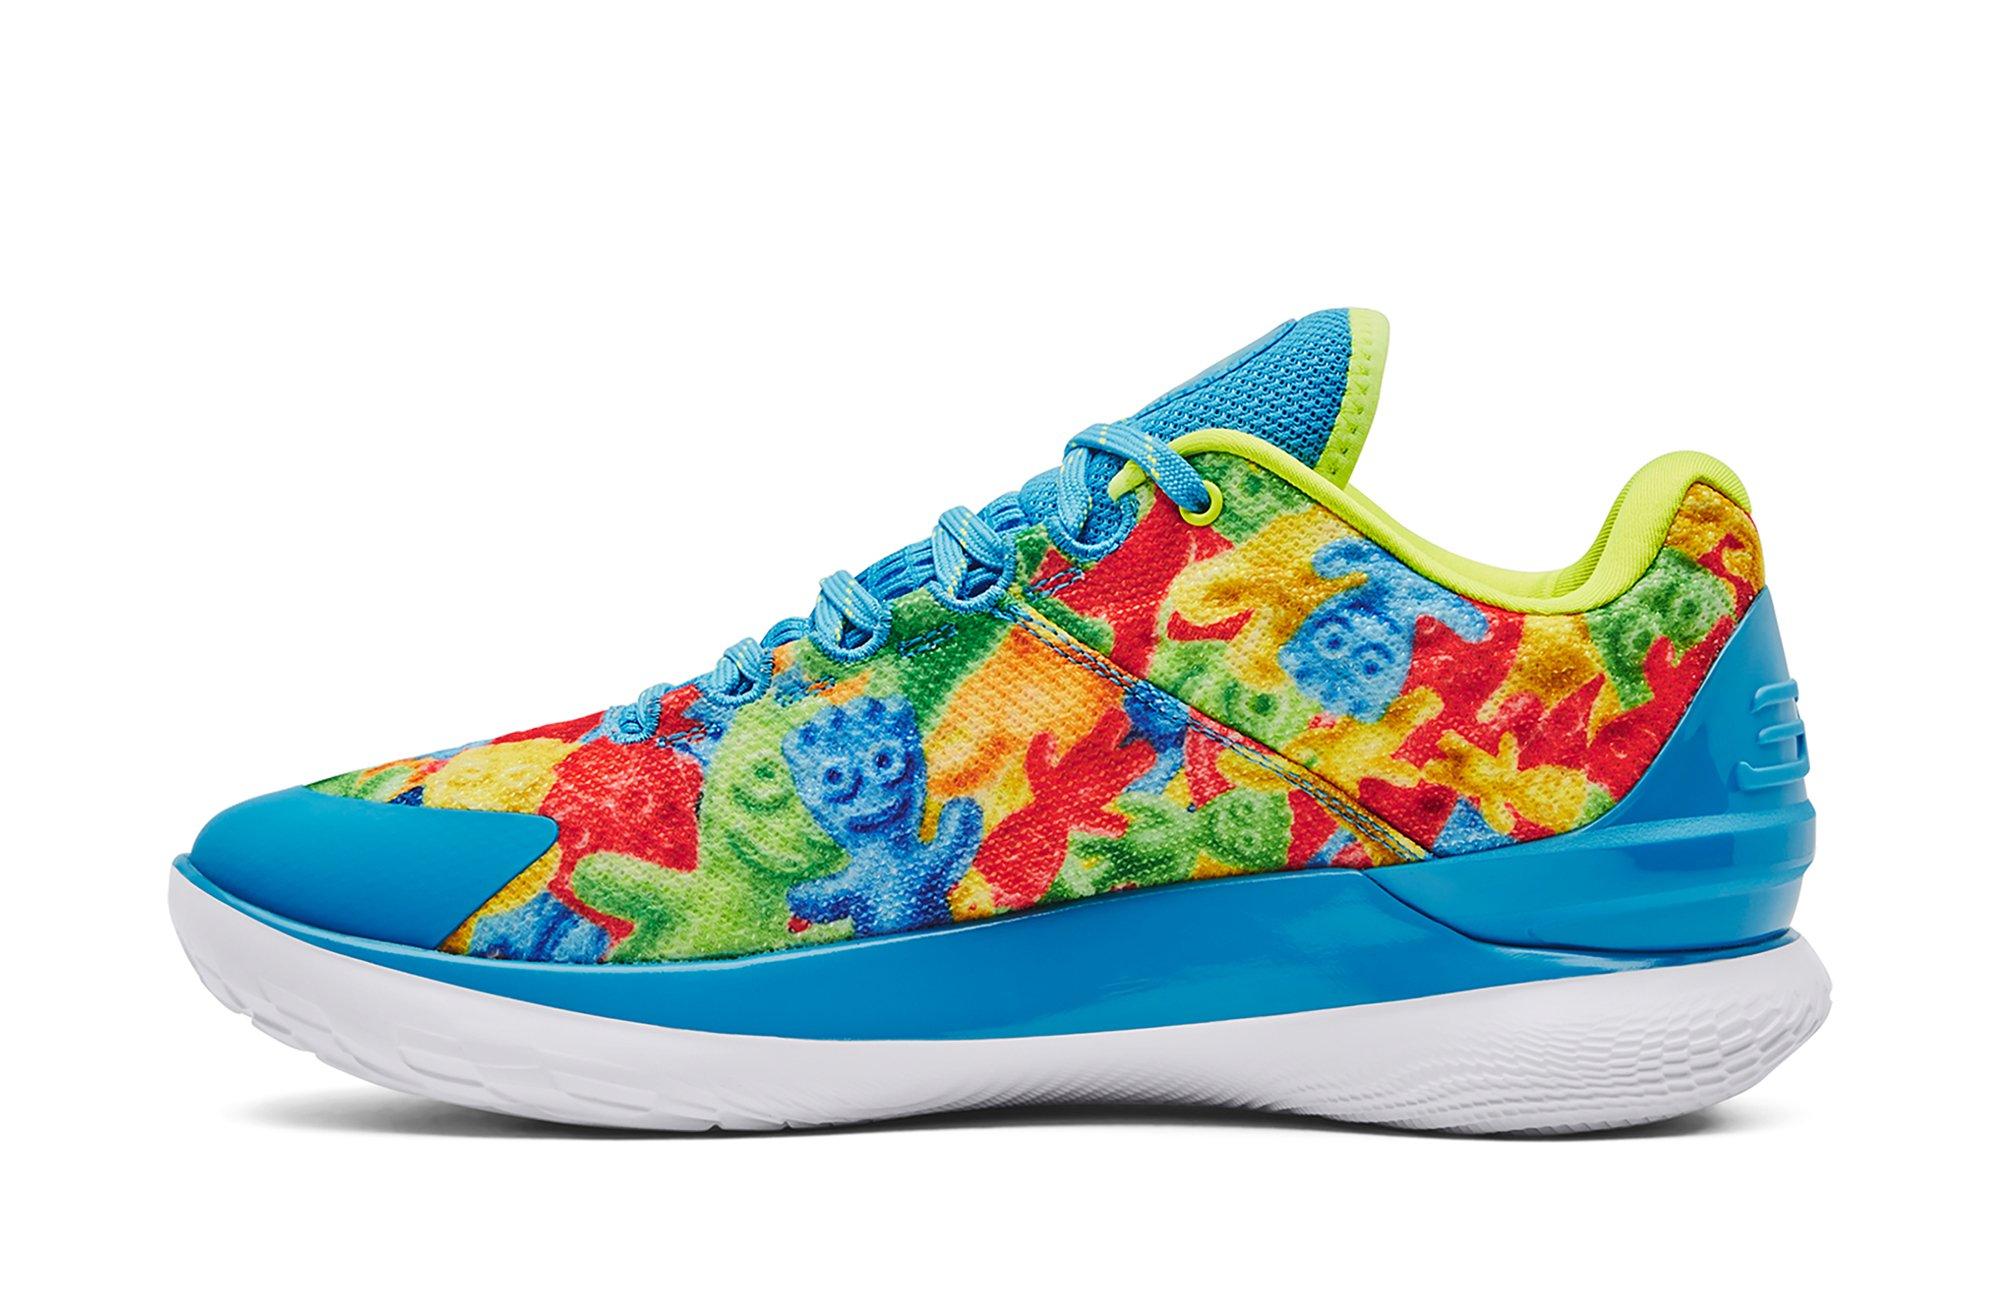 Under Armour Curry 10 "Sour Patch" left side